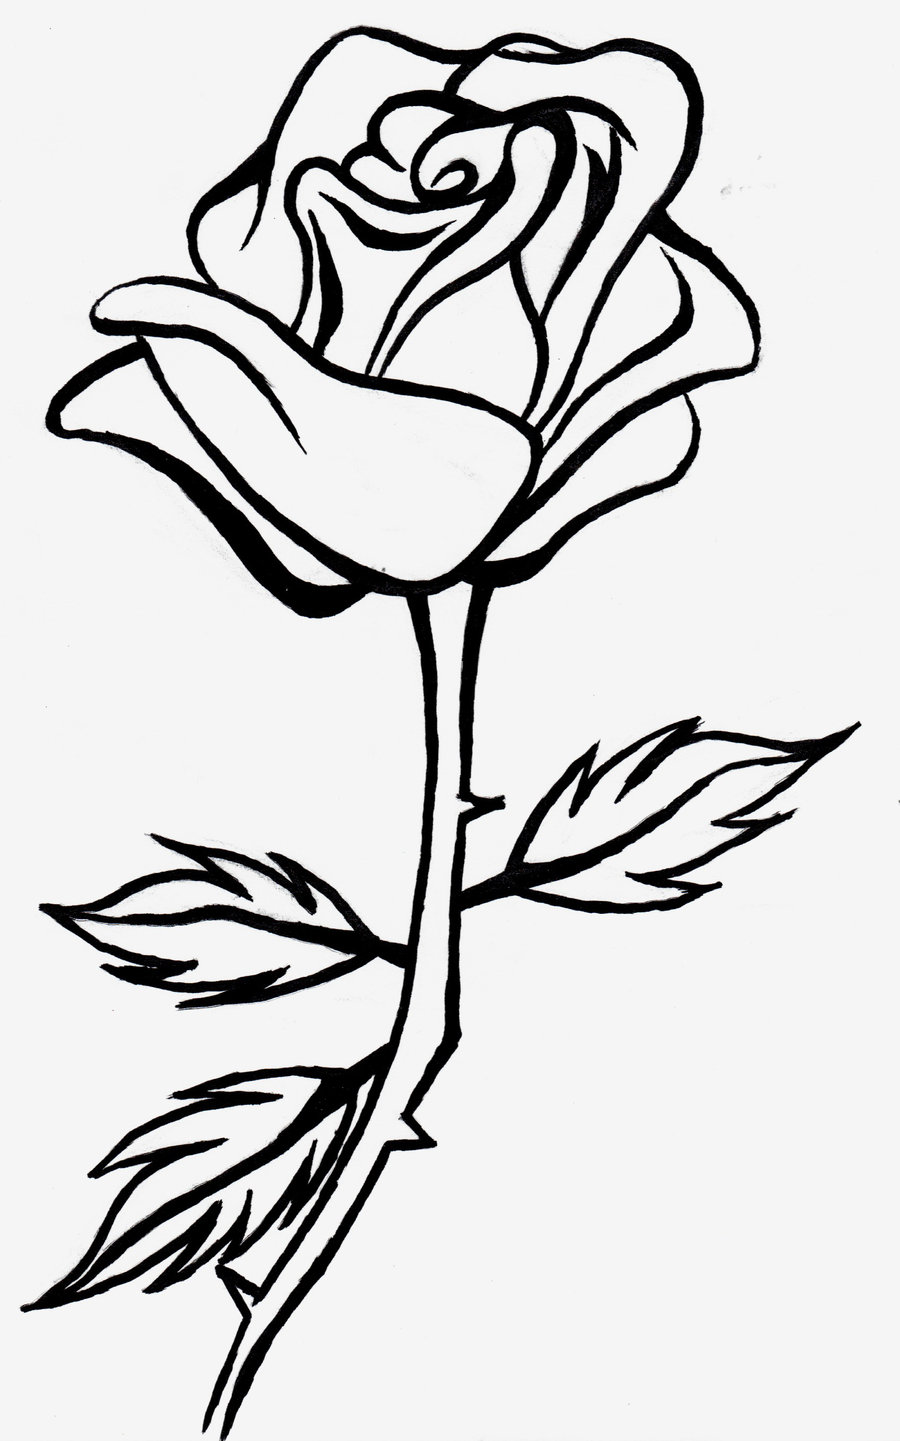 Roses Clipart Free Rose Image